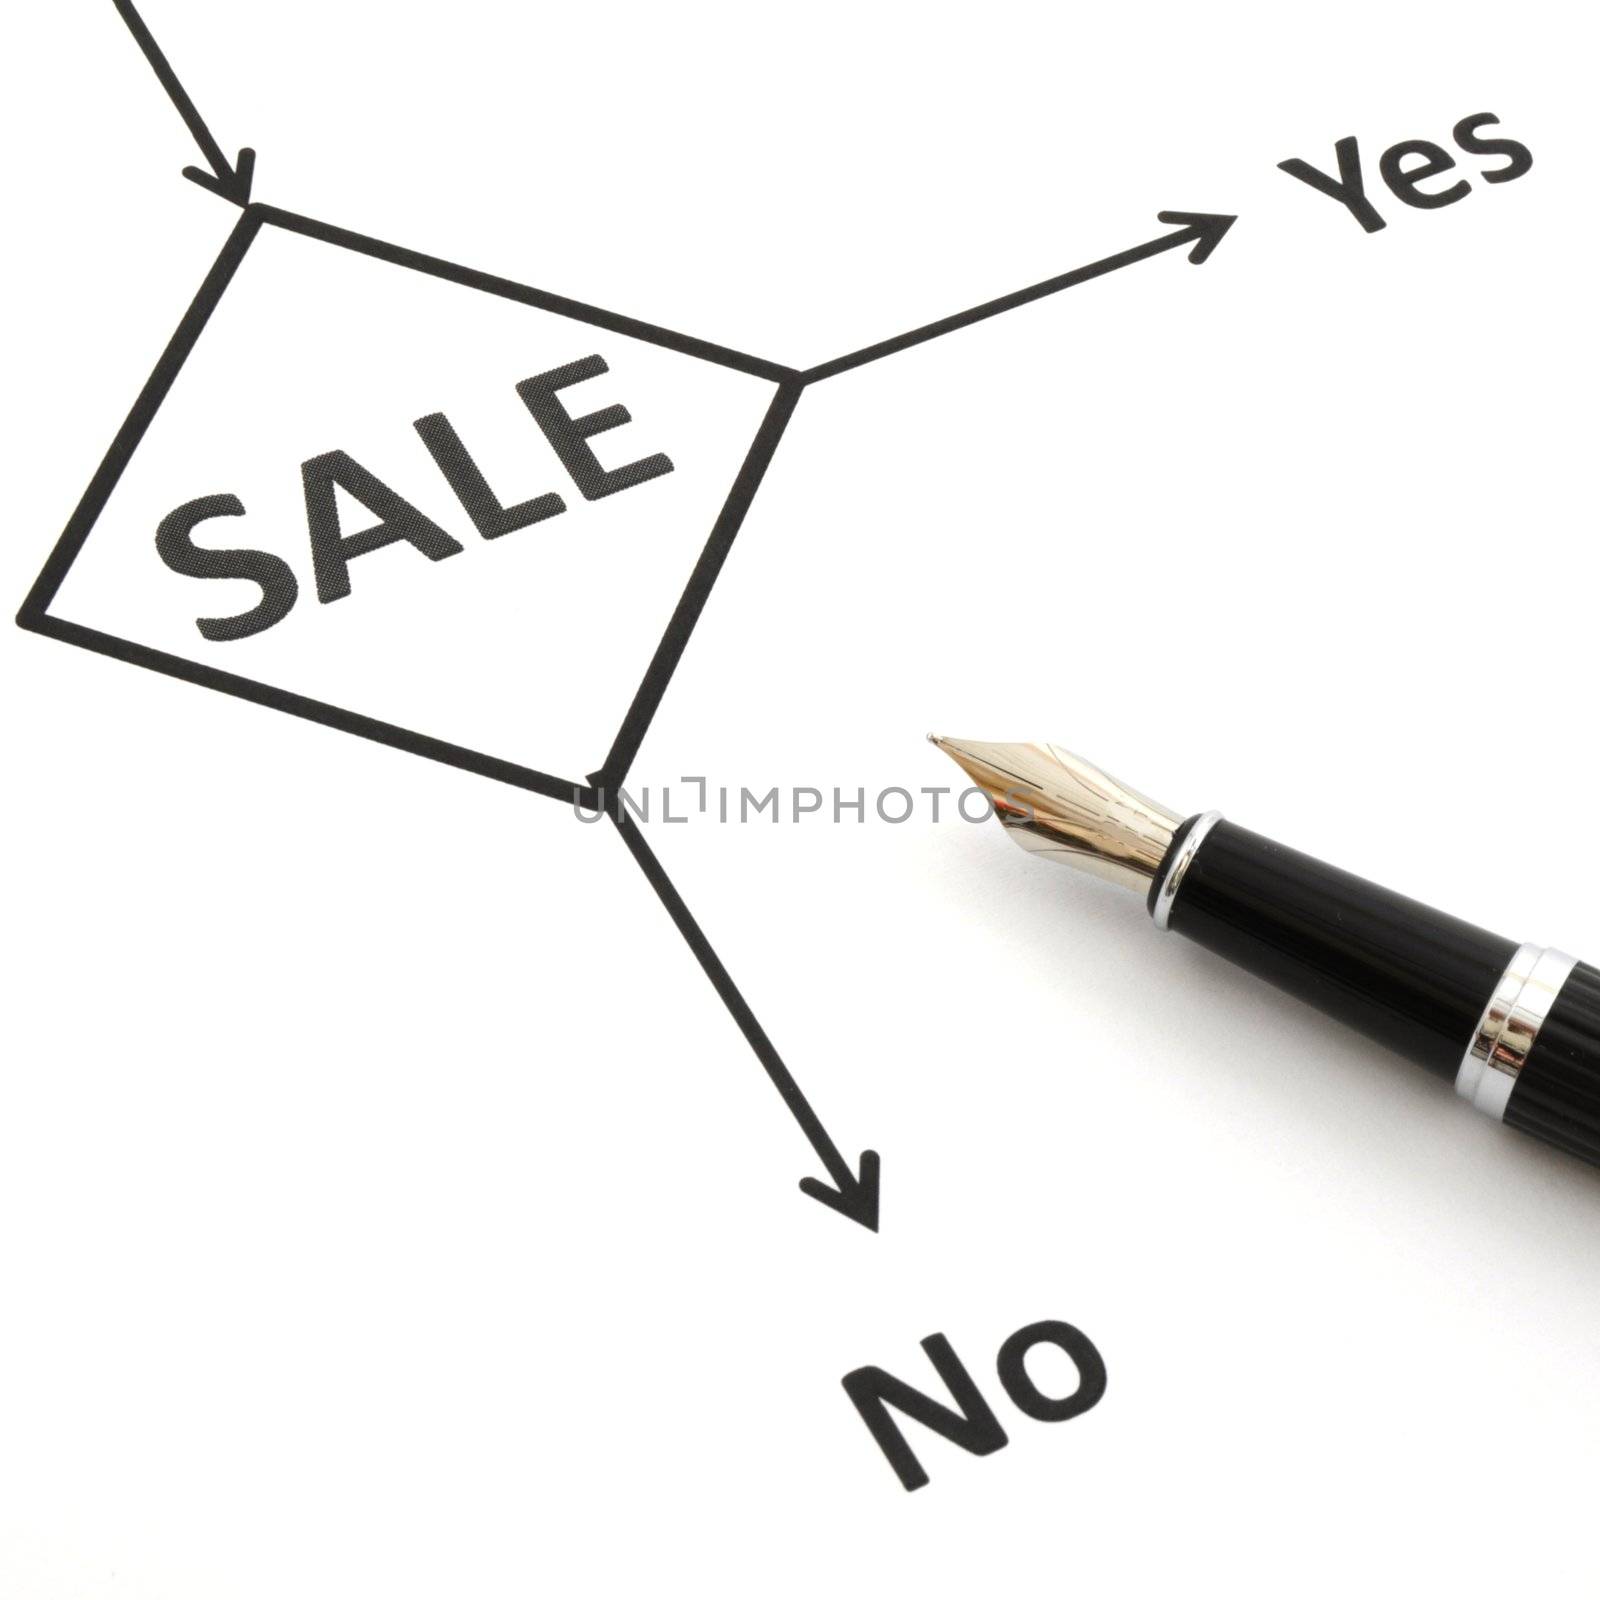 sale pen and flow chart showing retail commerce or marketing concept